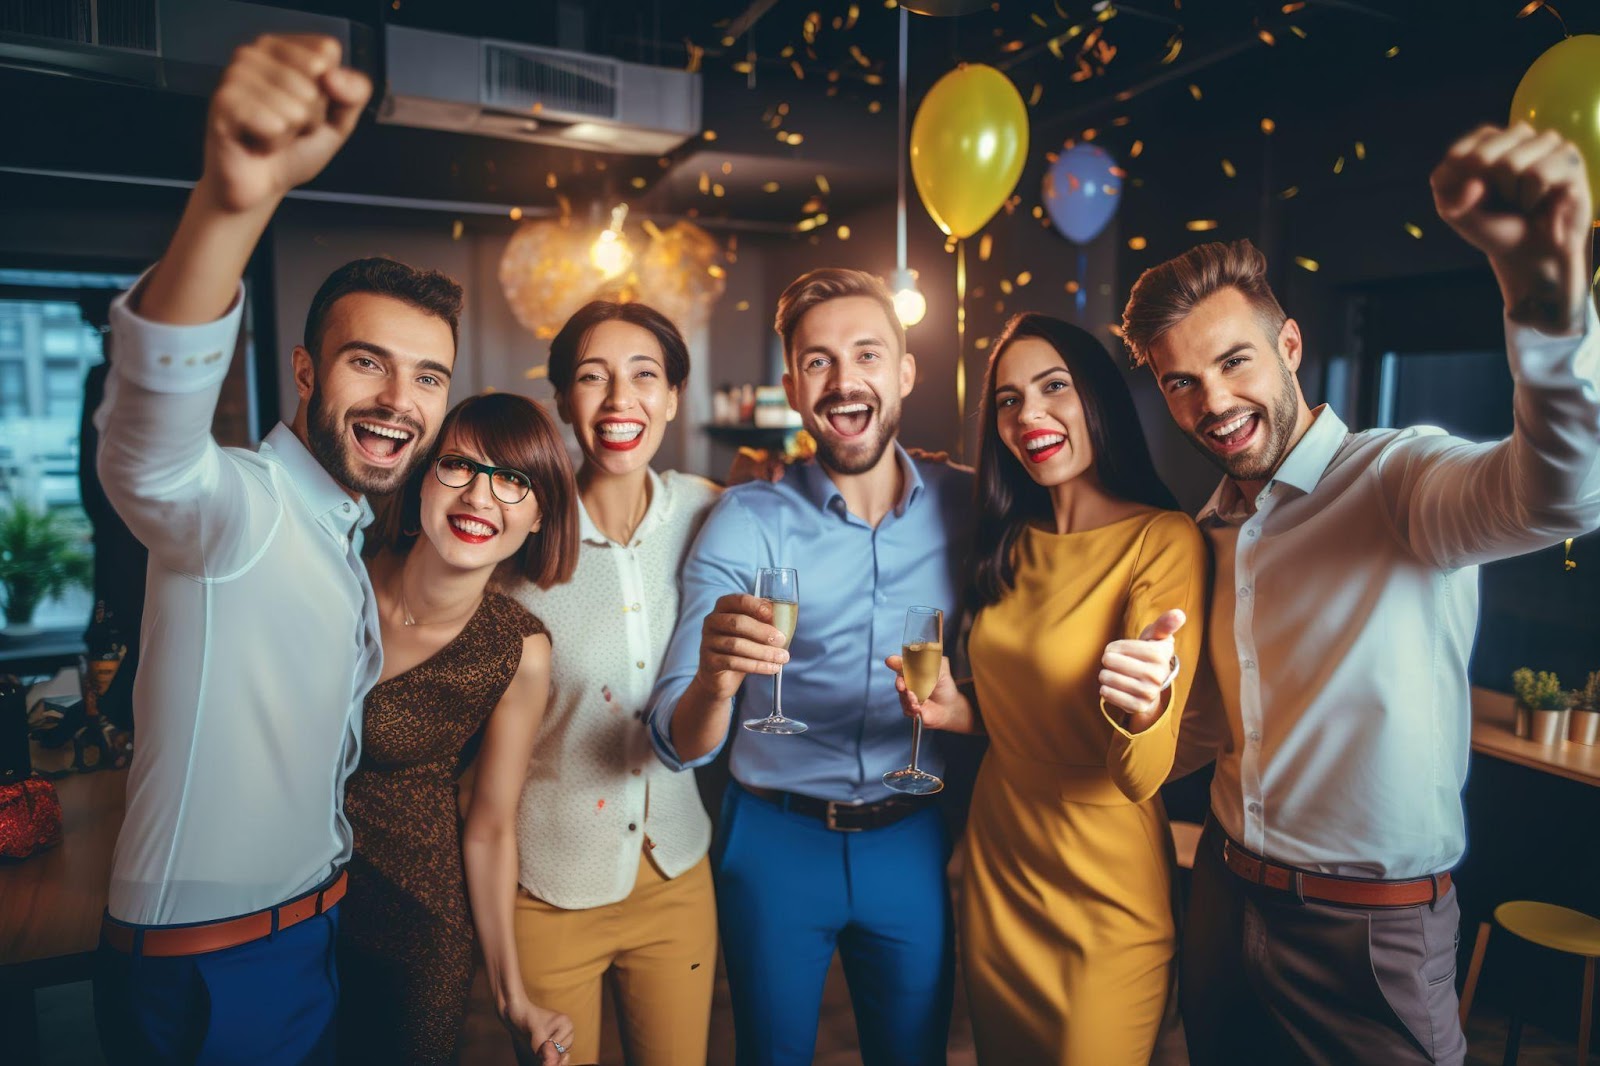 A group of joyful individuals celebrating at a lively party, filled with laughter and excitement